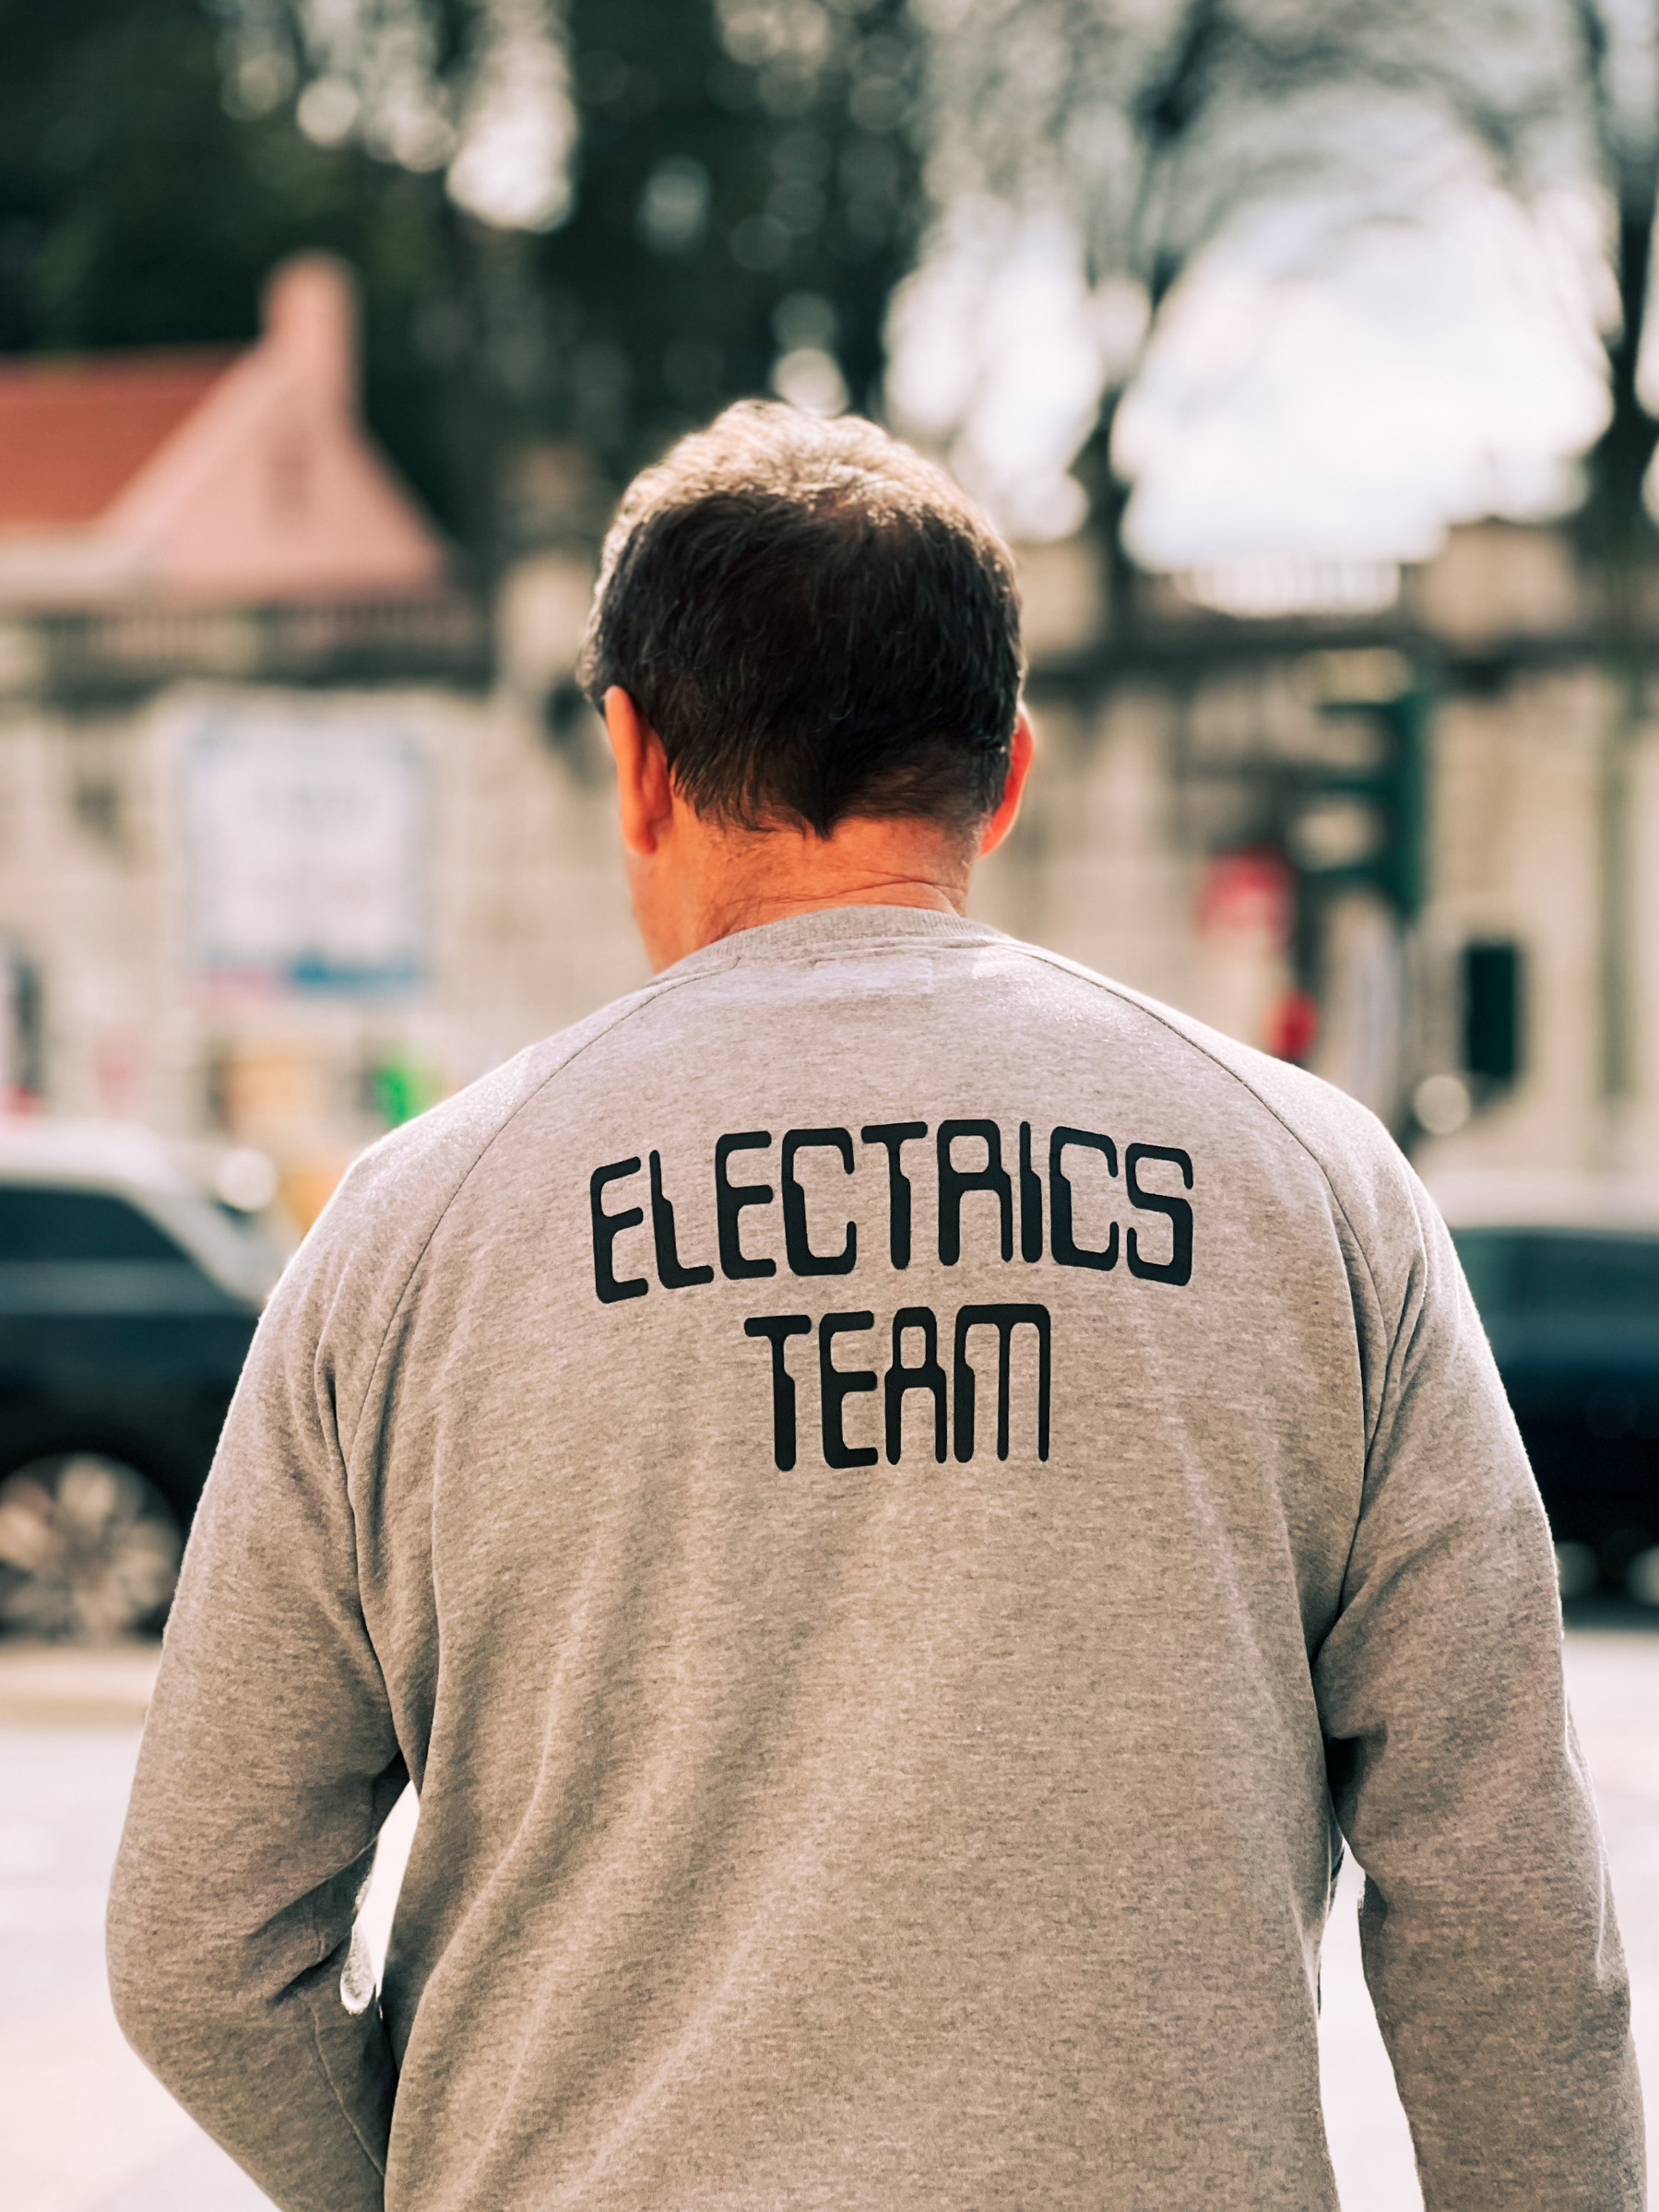 A man seen from behind wearing a grey shirt with the words &ldquo;ELECTRICS TEAM&rdquo; on the back. The background is slightly blurred showing an urban setting with trees, a road, and vehicles.